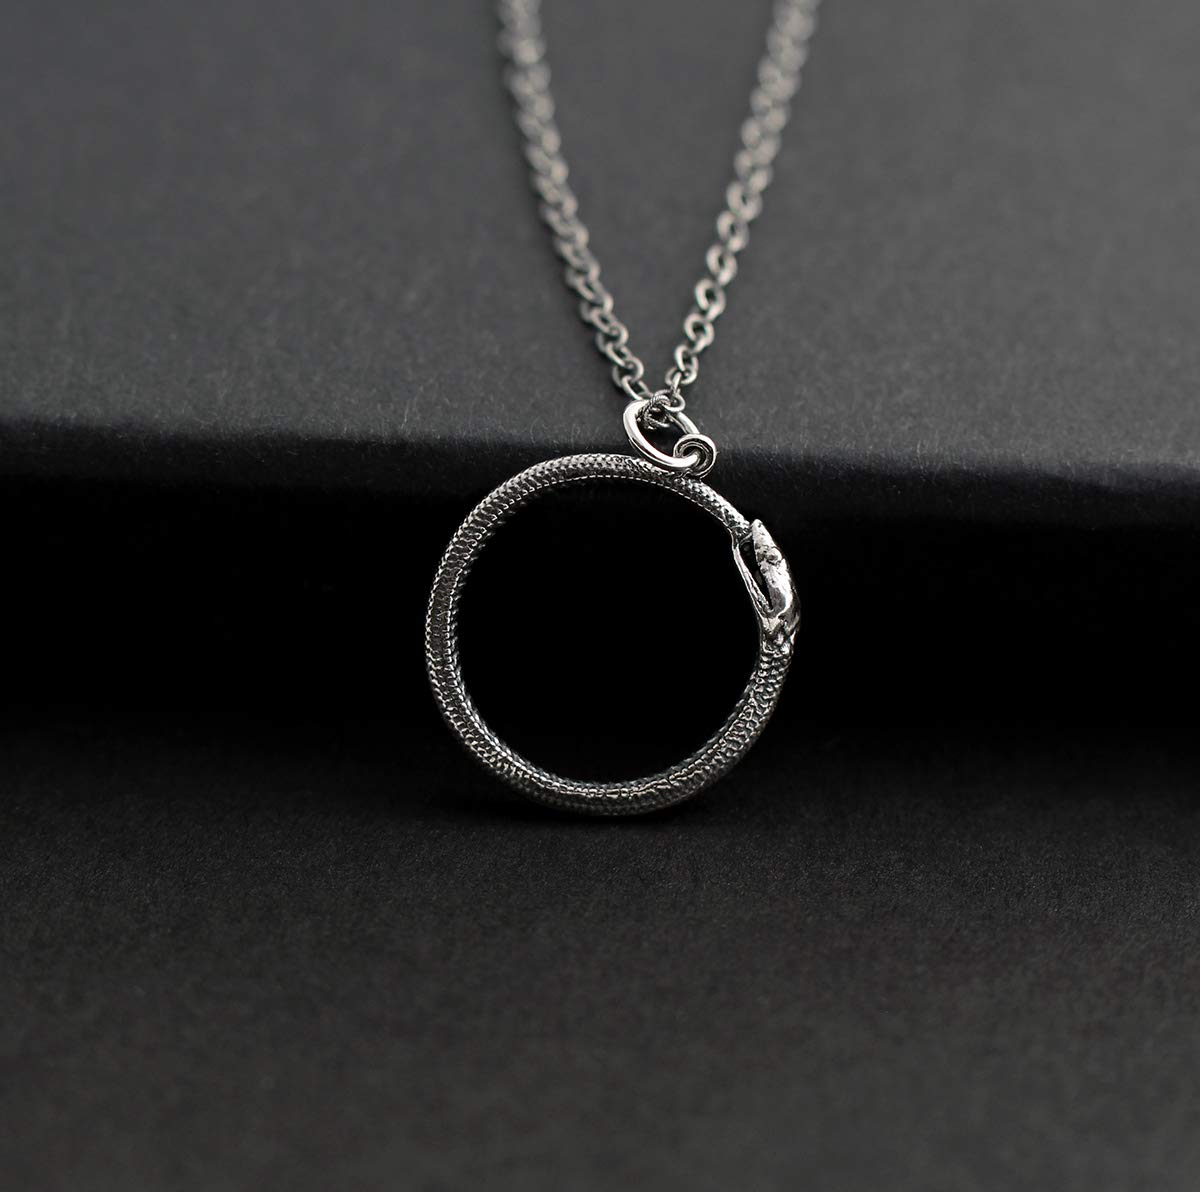 Two Cups Sterling Silver Ouroboros Necklace • Snake Necklace • Serpent Pendant Necklace • Antiqued Sterling Silver Adjustable Chain